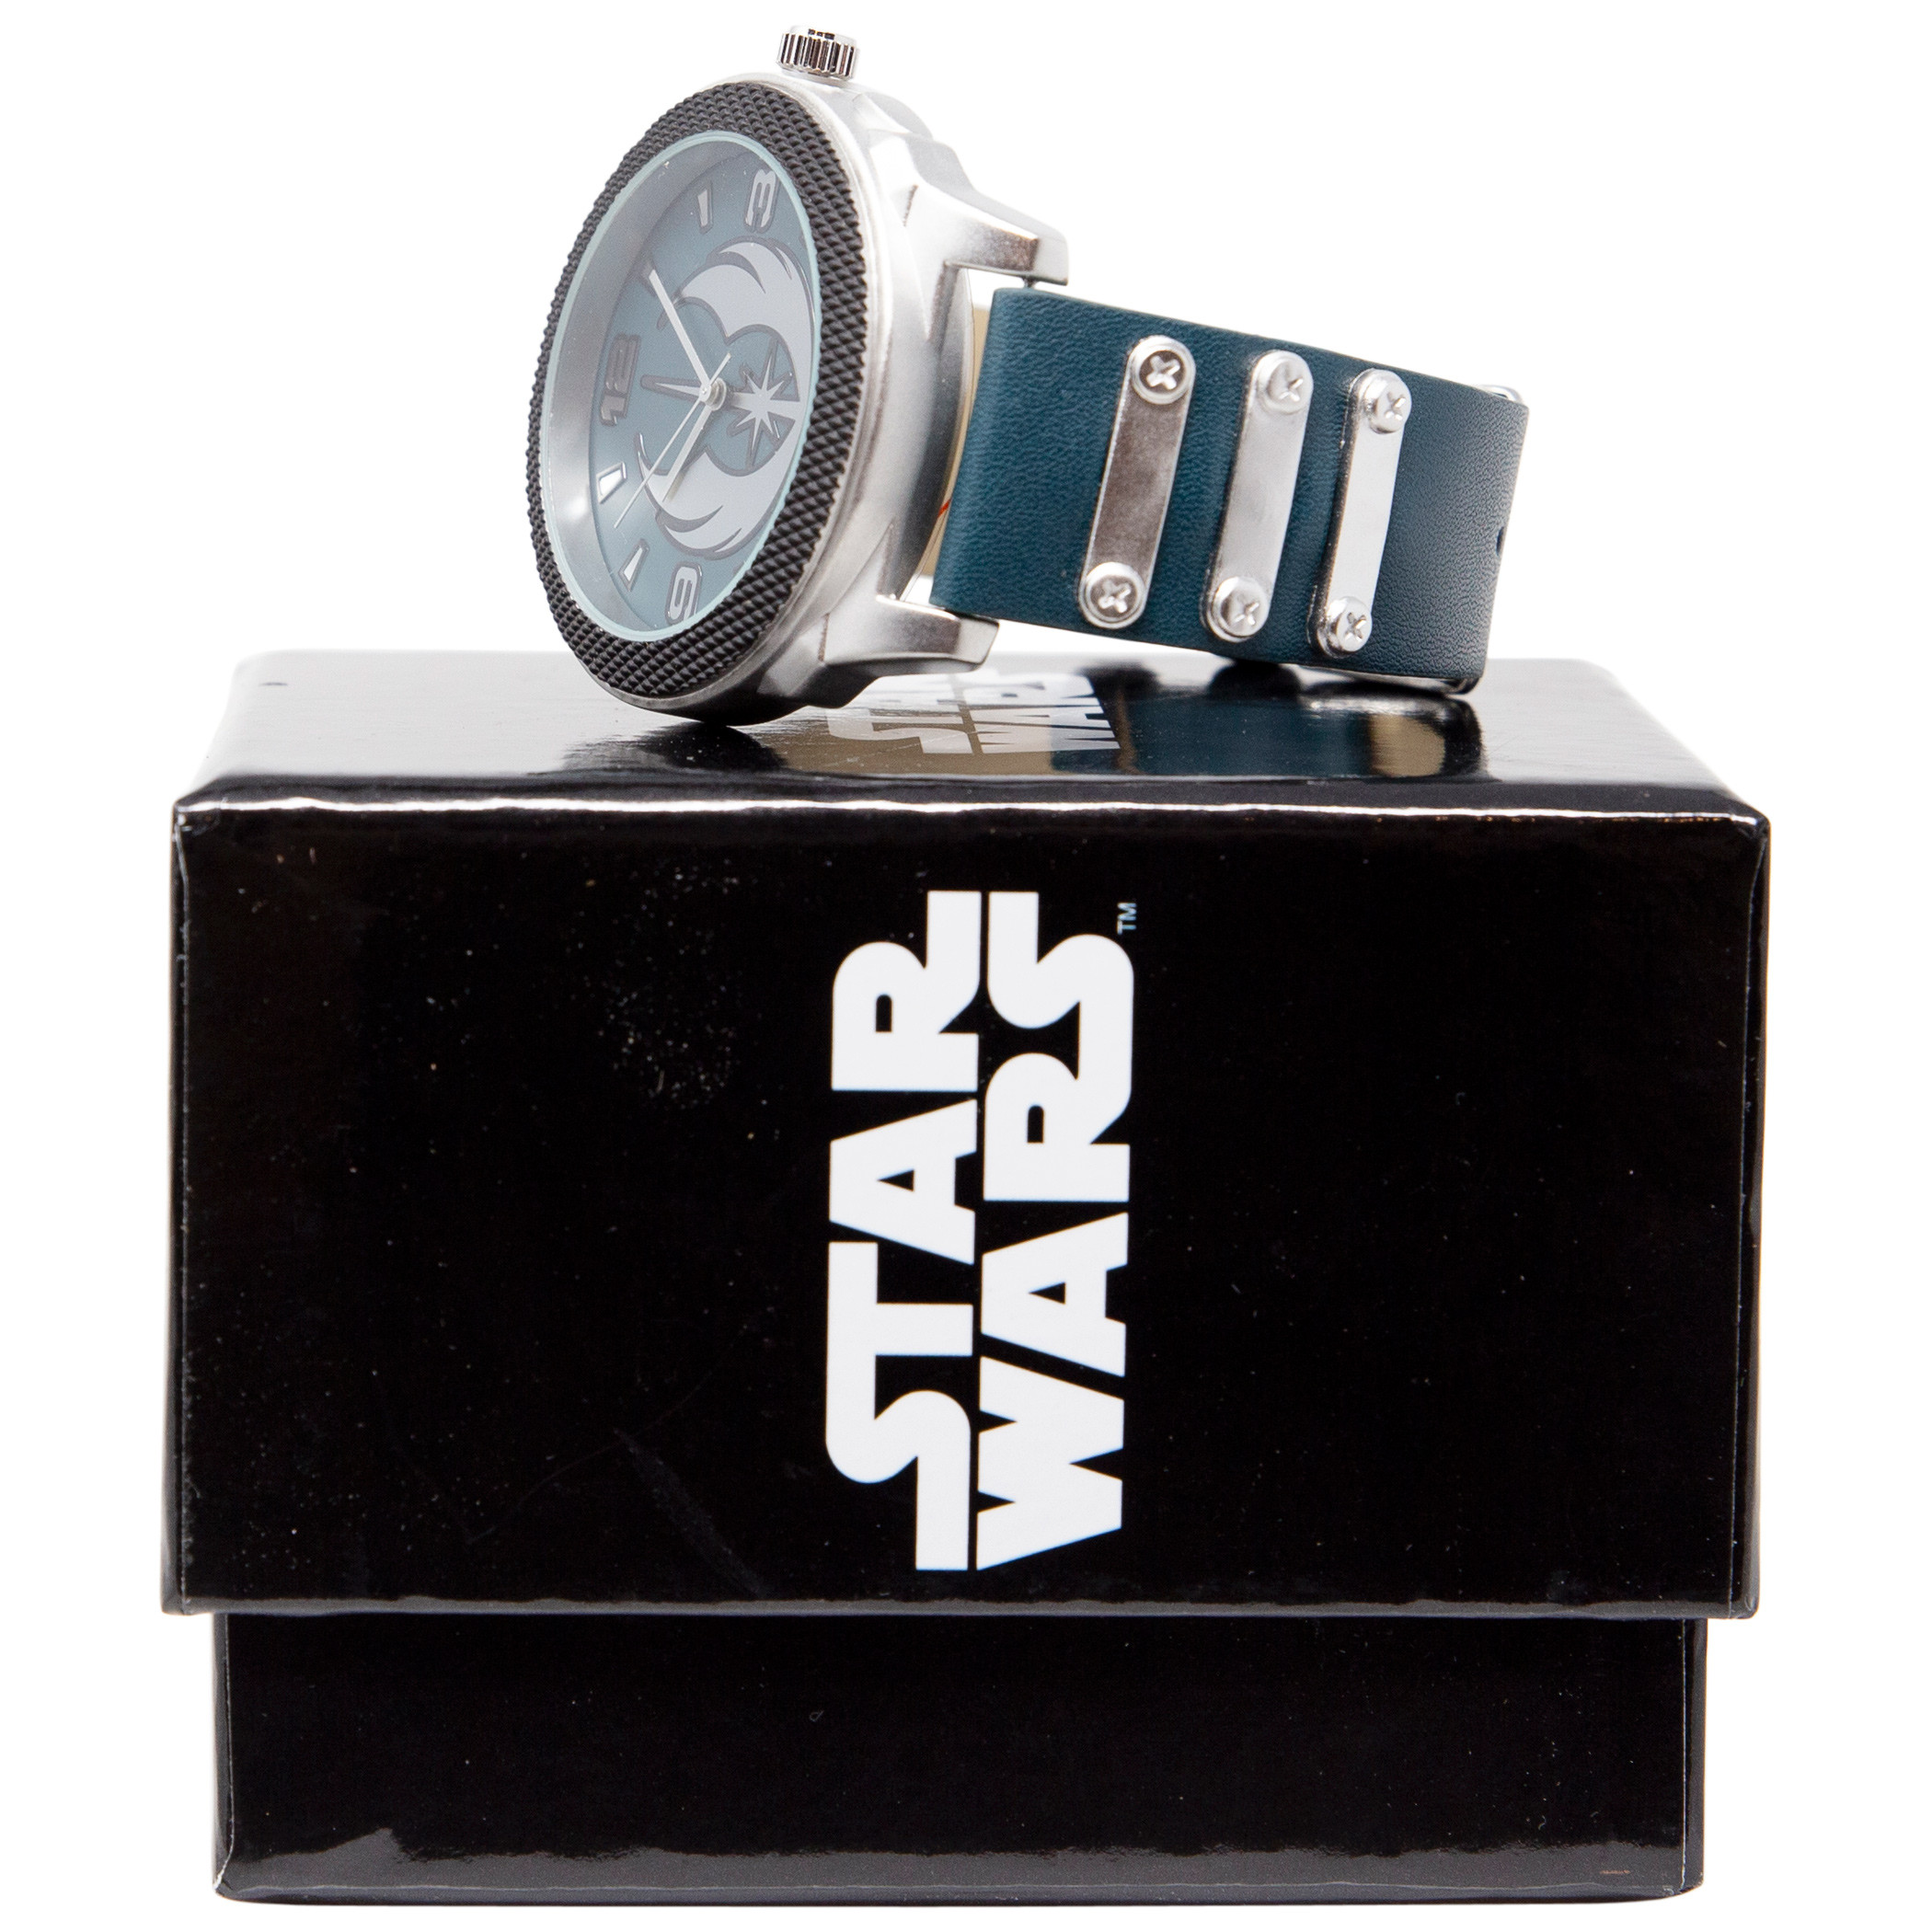 Star Wars New Jedi Order Symbol Watch With Rubber Band